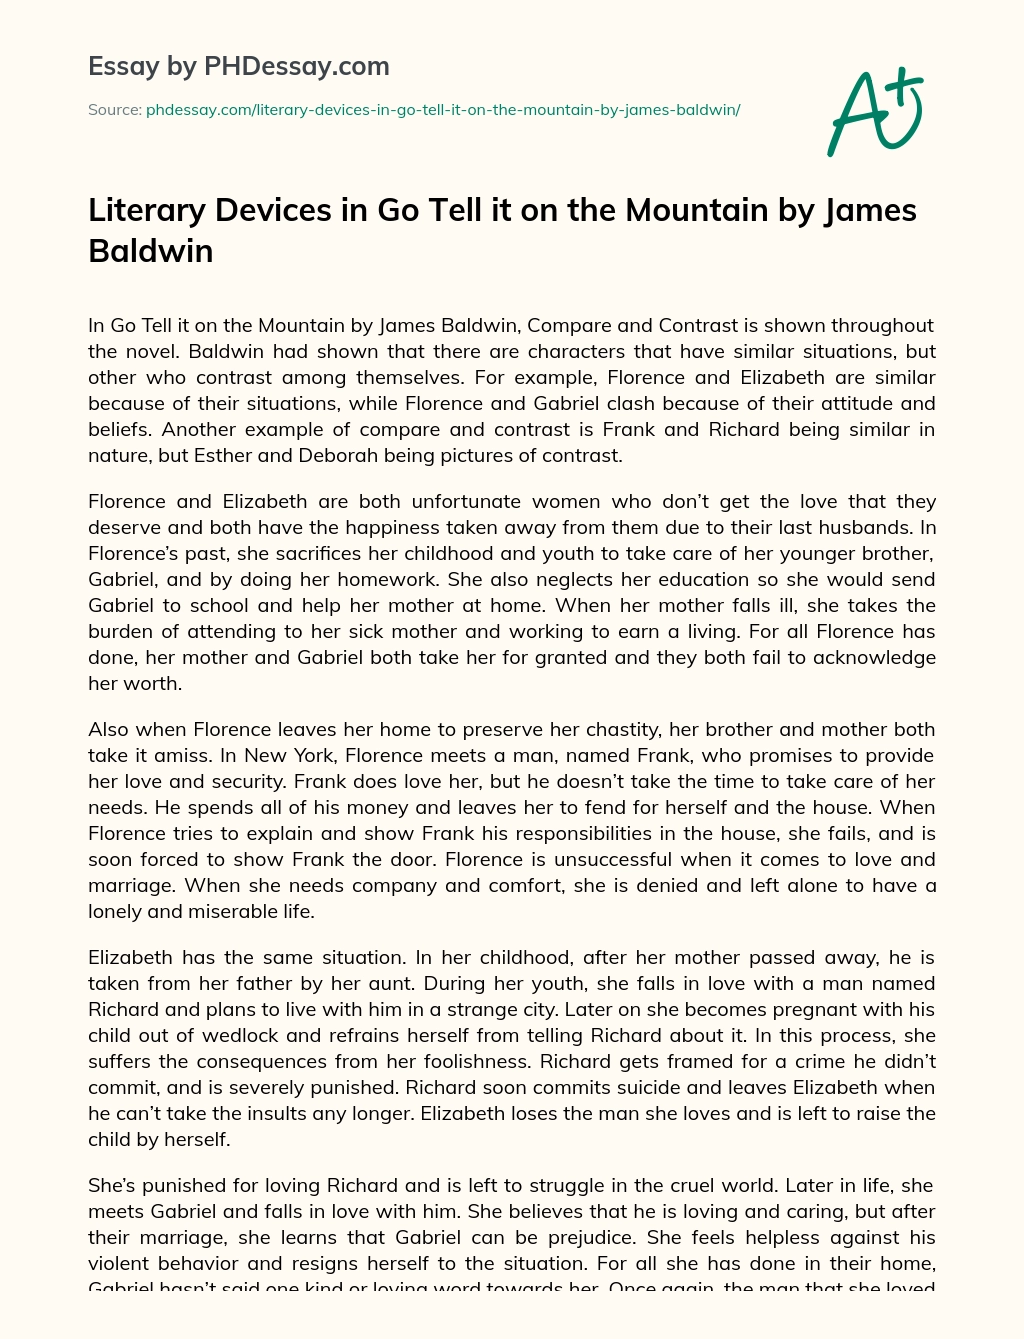 Literary Devices in Go Tell it on the Mountain by James Baldwin essay